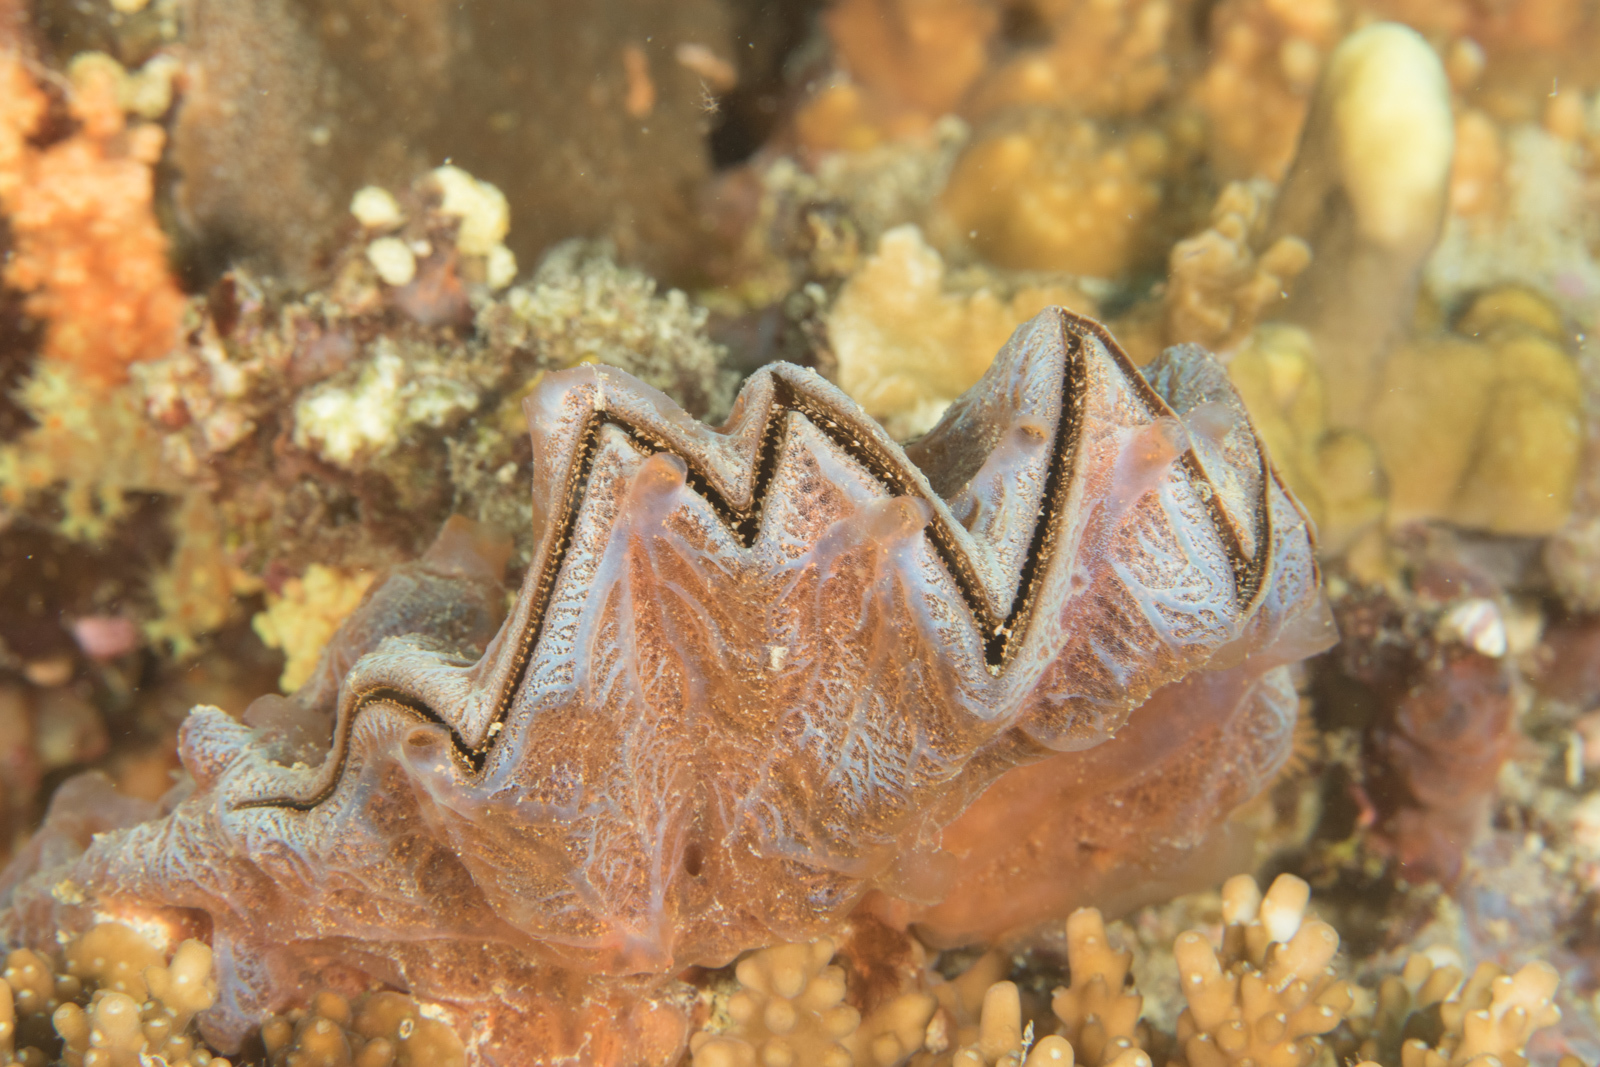 Image of Cock's comb oyster